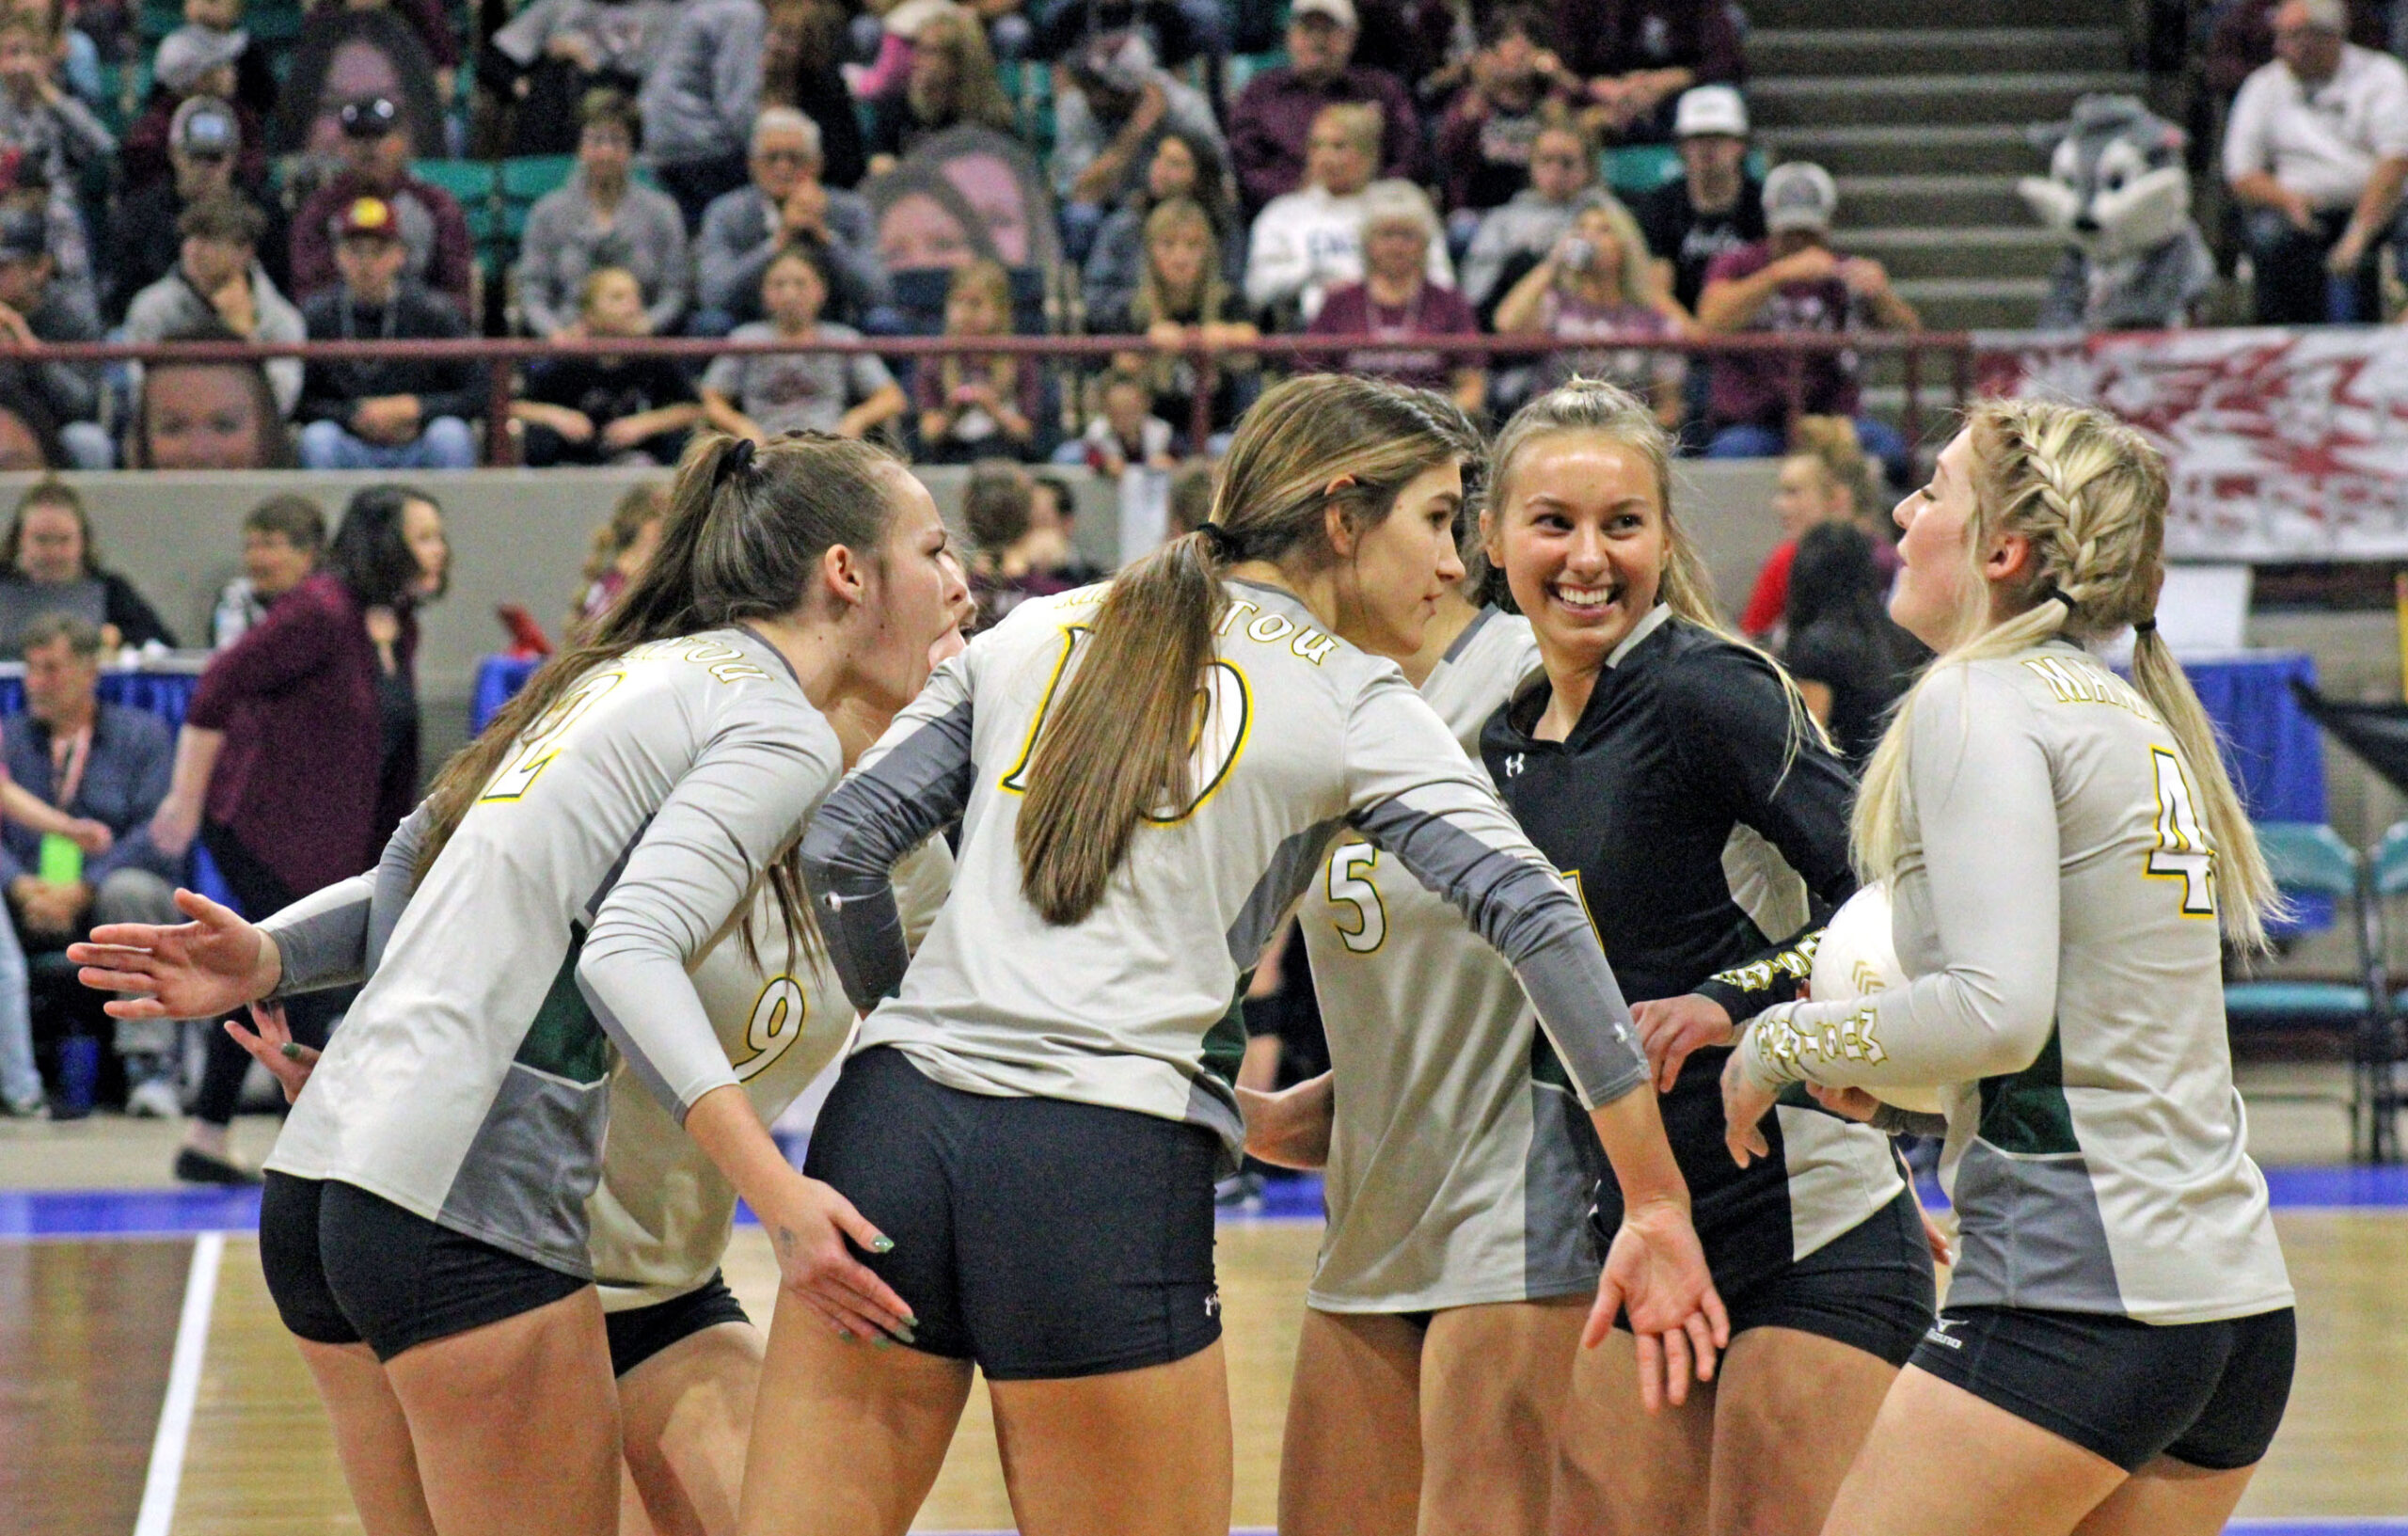 Photo by Daniel Mohrmann. The Manitou Springs volleyball team celebrates a point during its match against Platte Valley at the 3A State Volleyball Tournament.